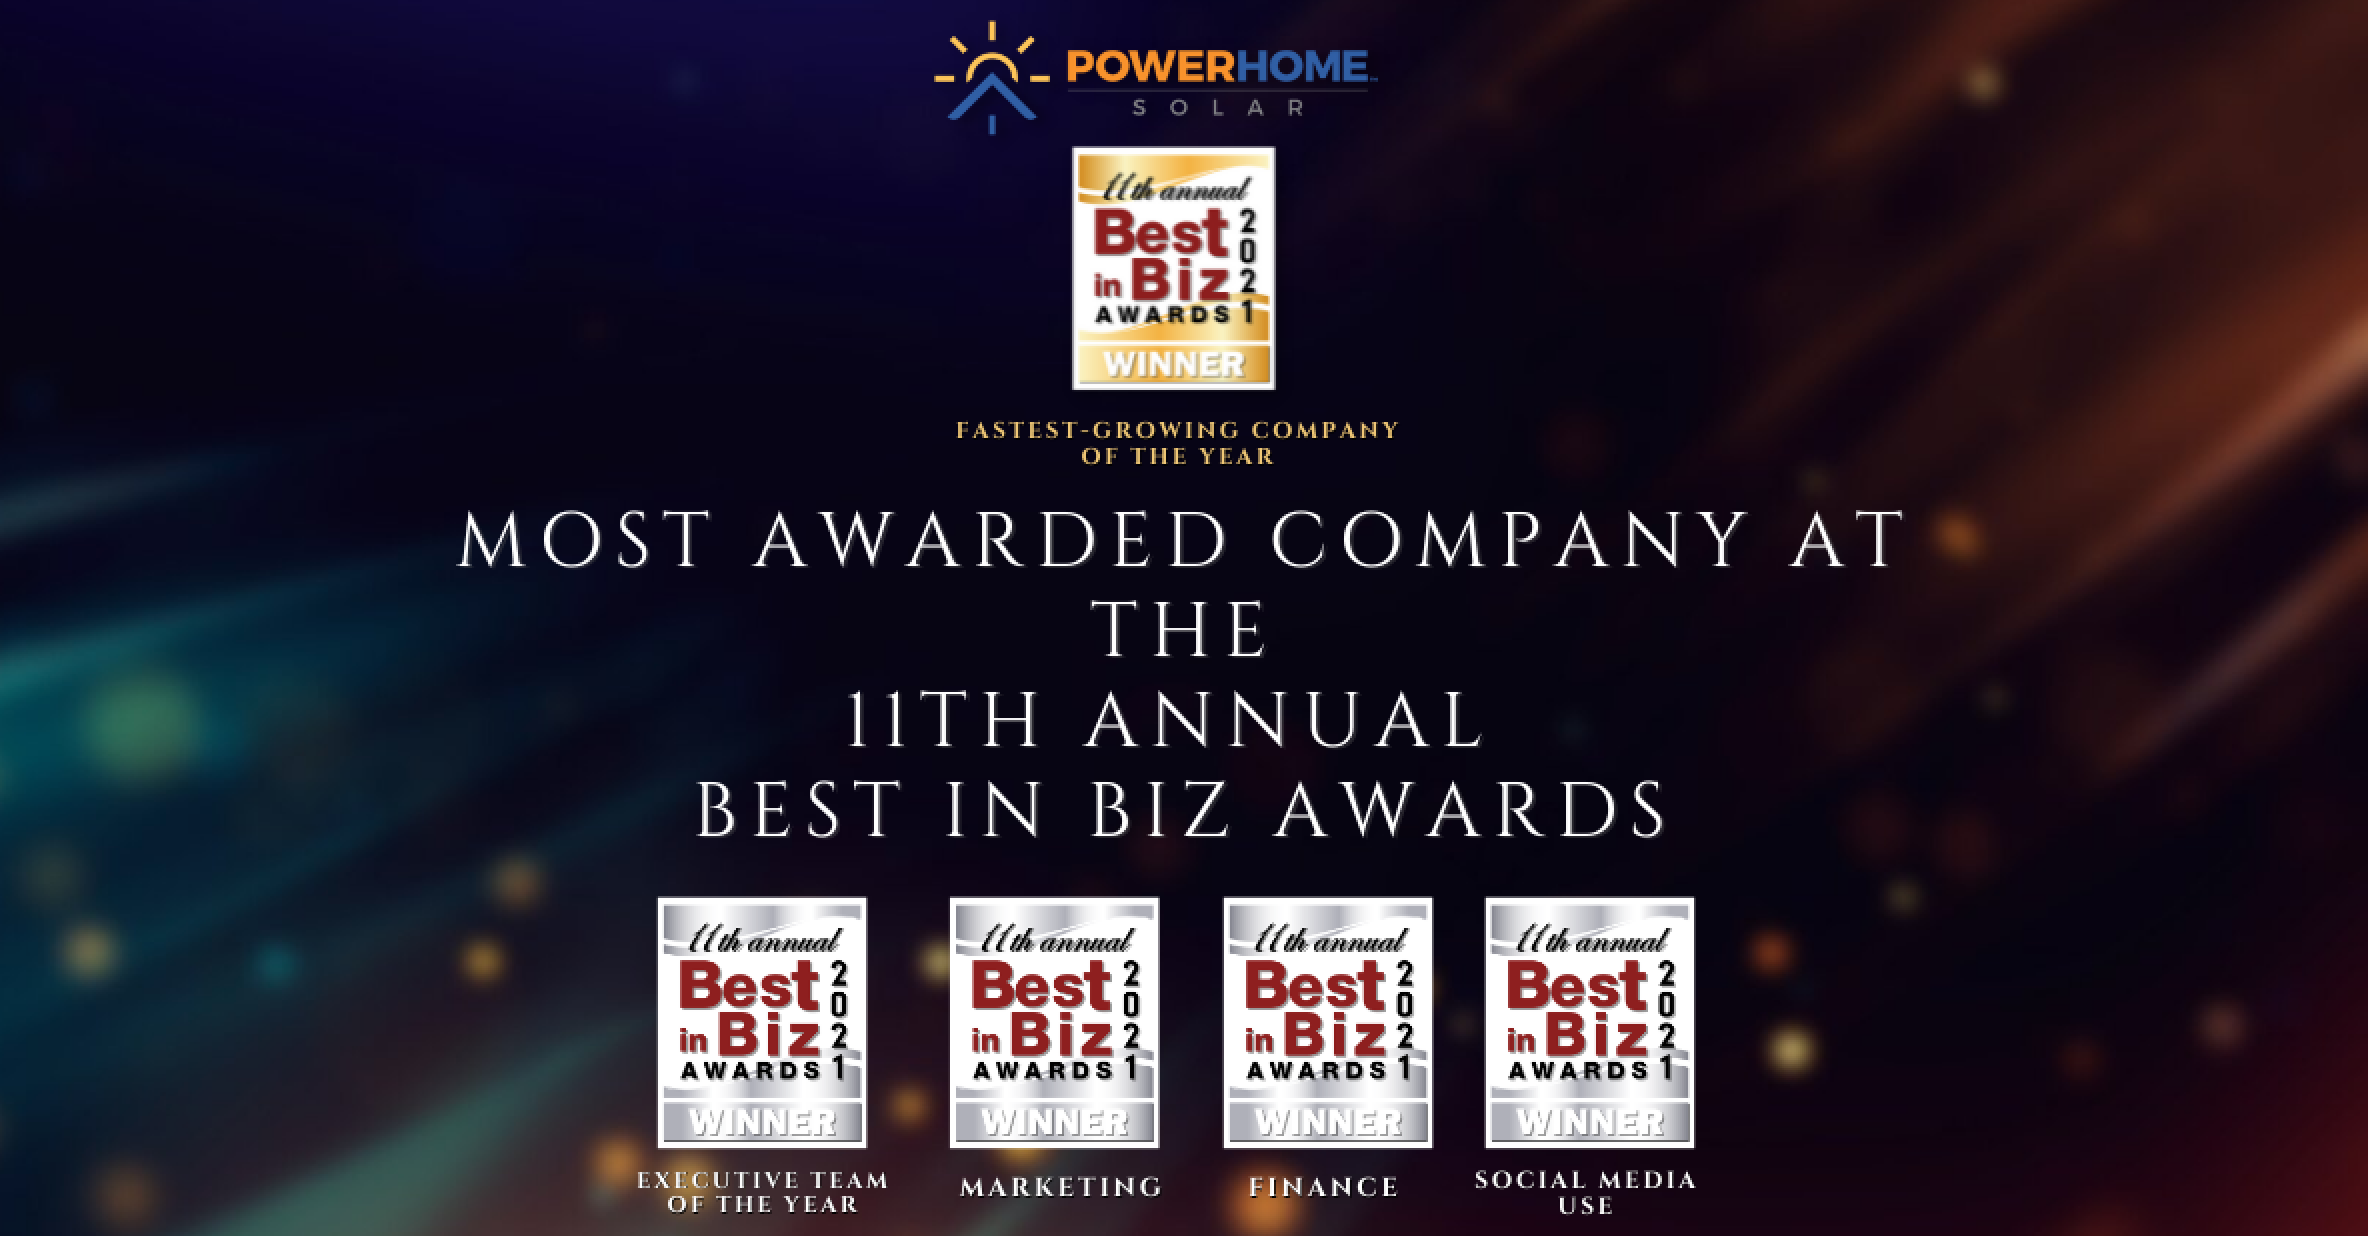 MOST AWARDED COMPANY AT THE 11TH ANNUAL BEST IN BIZ AWARDS